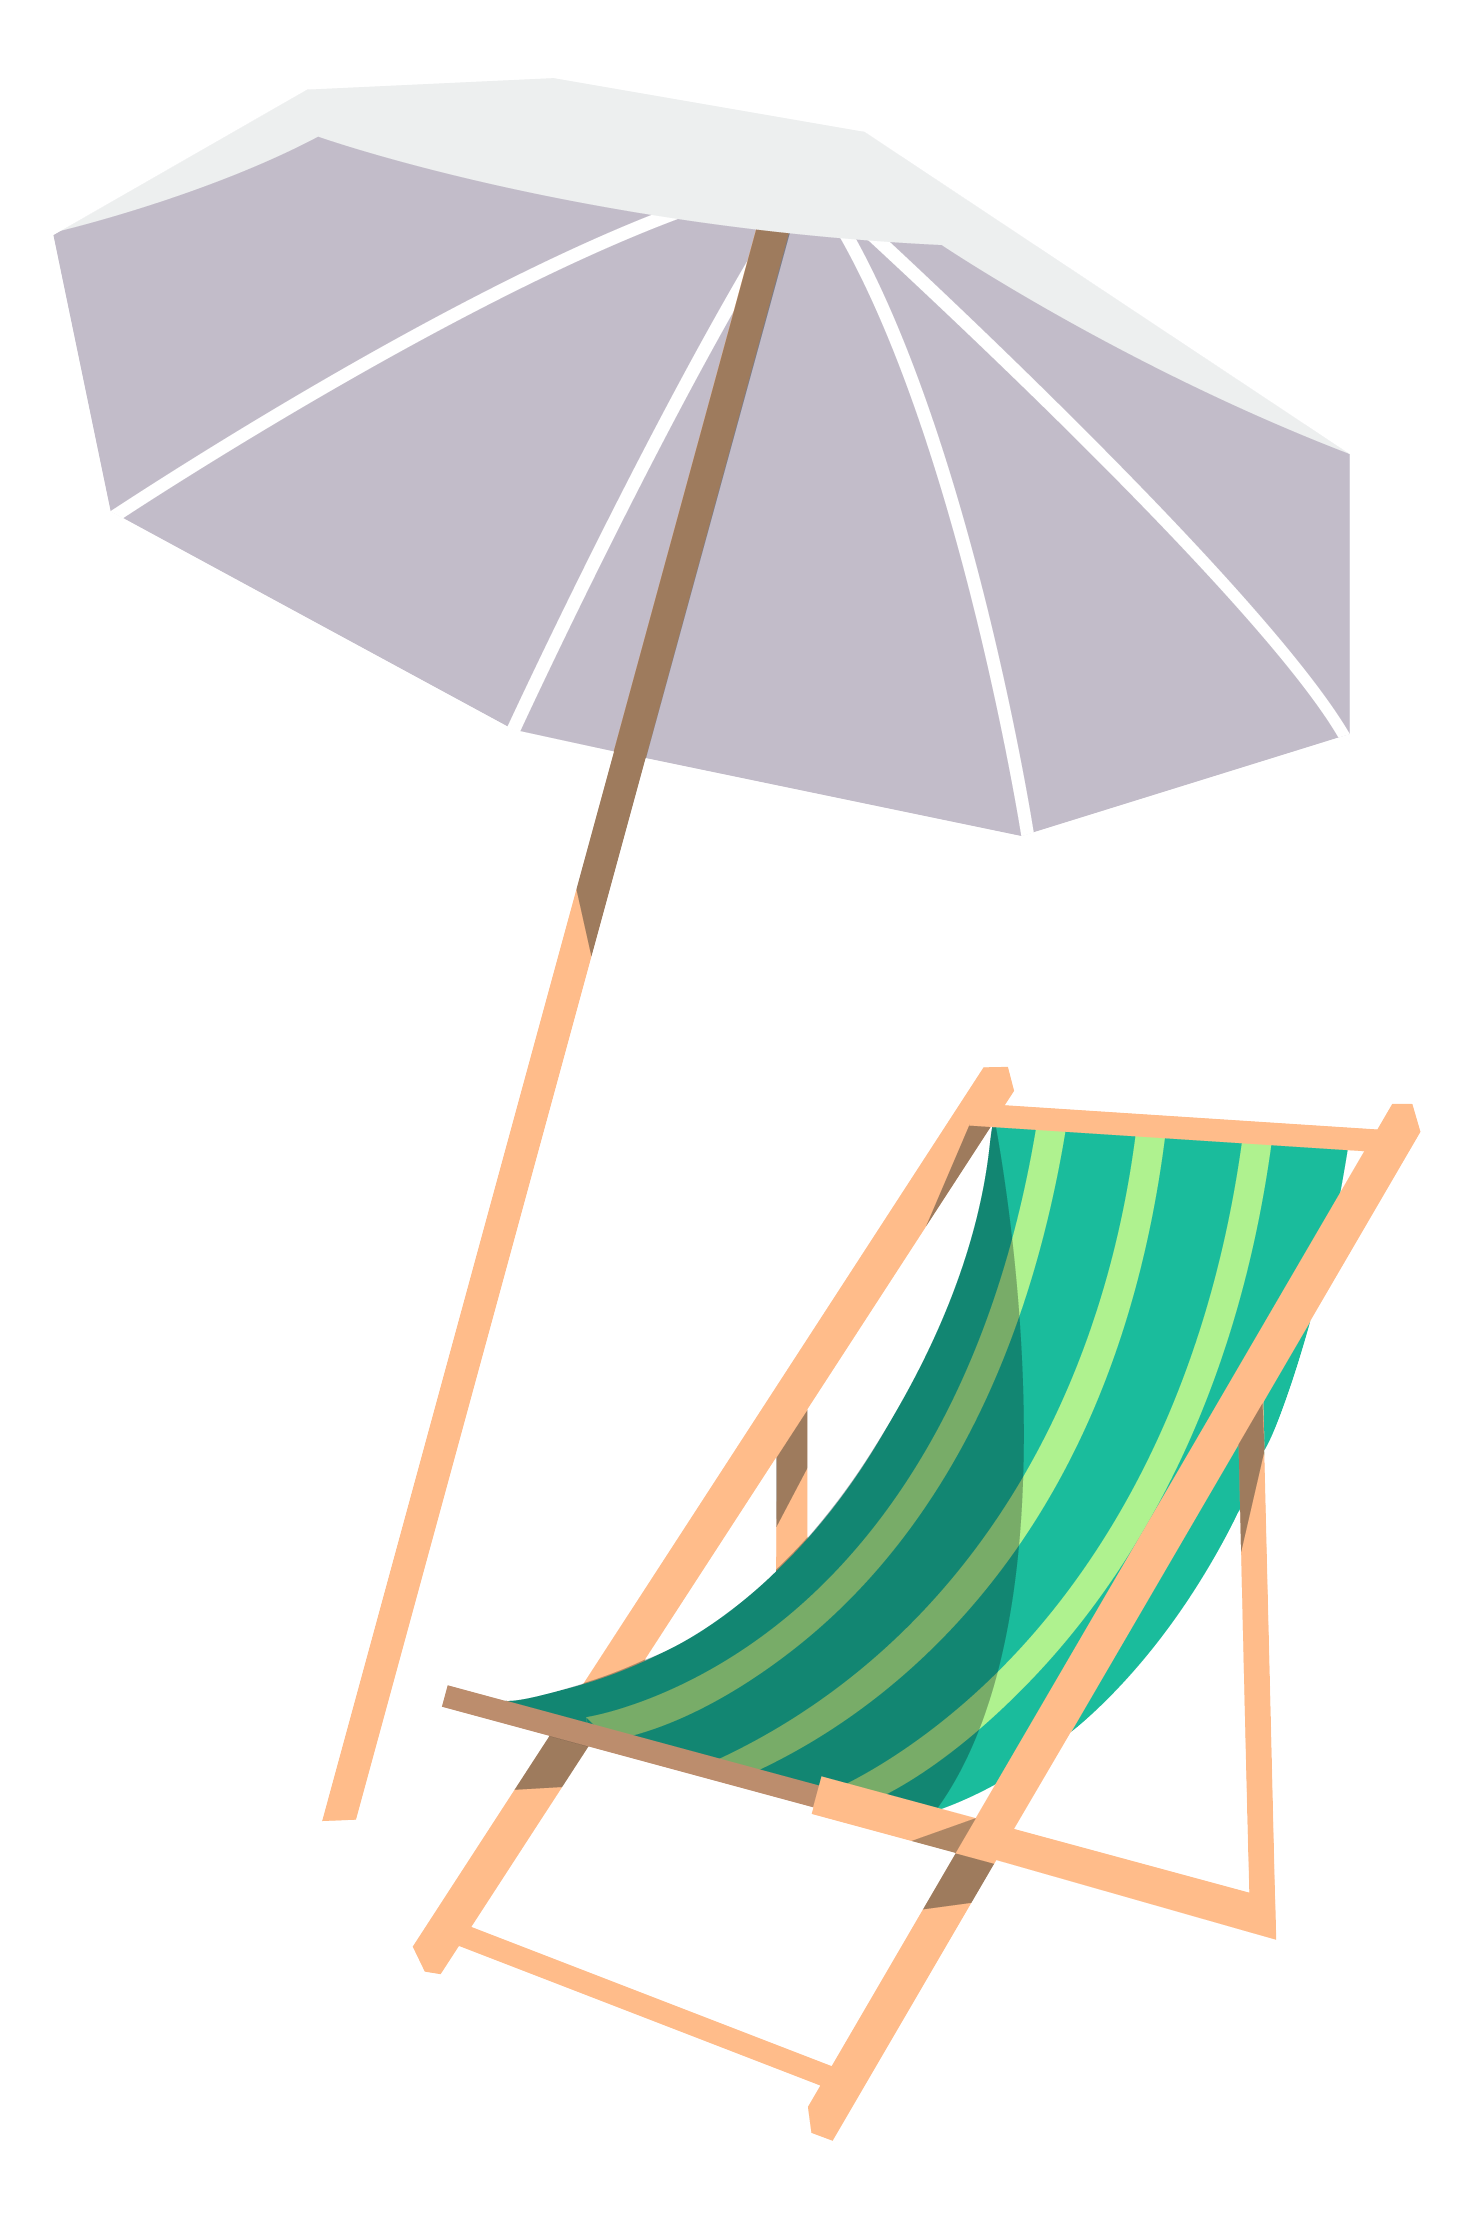 Illustration of a beach chair and umbrella